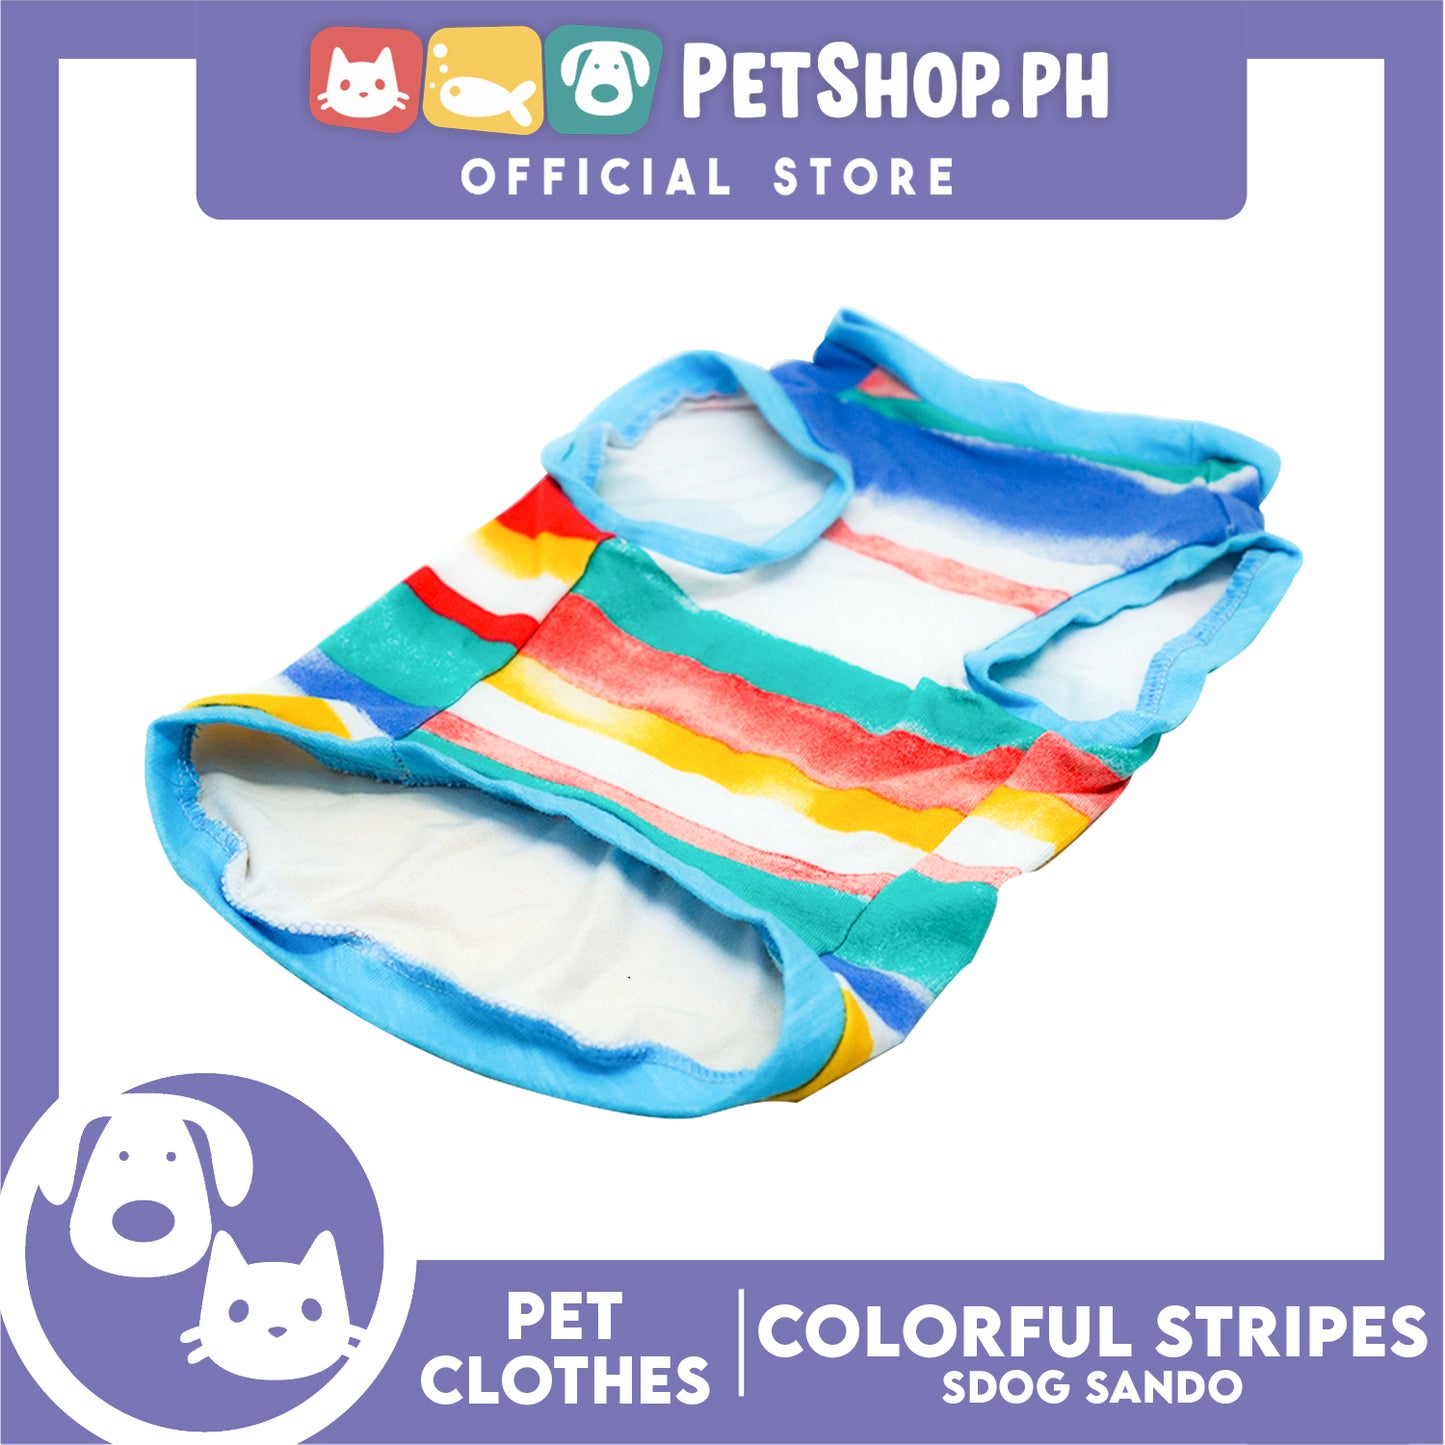 Pet Shirt Colorful Stripes Sando Shirt (Medium) Perfect Fit for Dogs and Cats